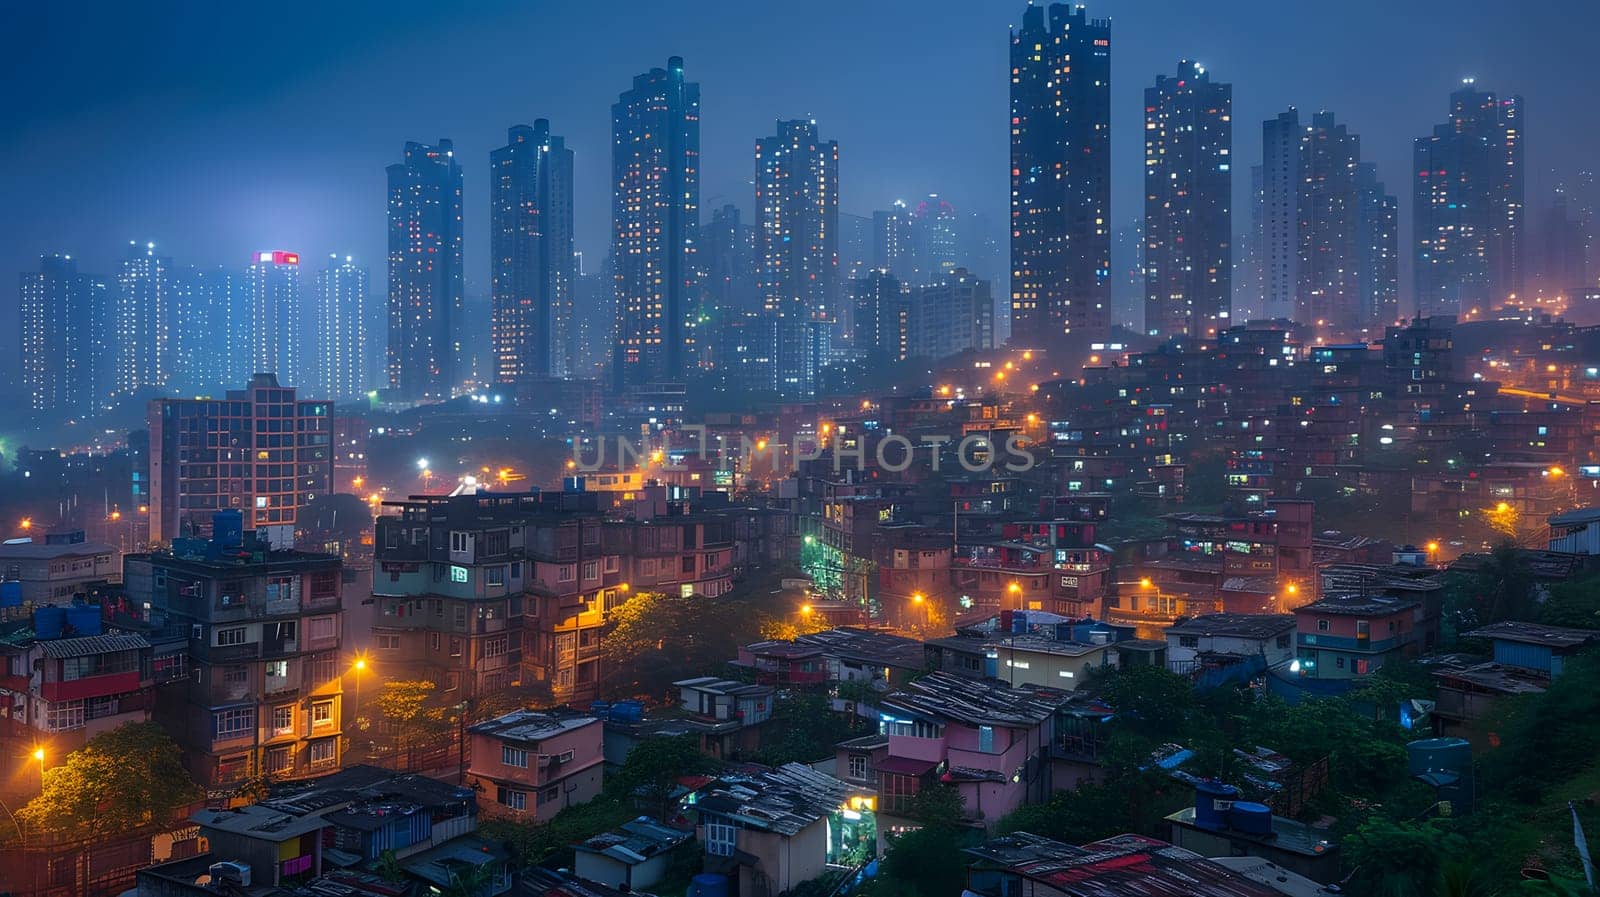 A mesmerizing urban landscape at night, filled with skyscrapers and tower blocks illuminated by bright city lights against the dark sky